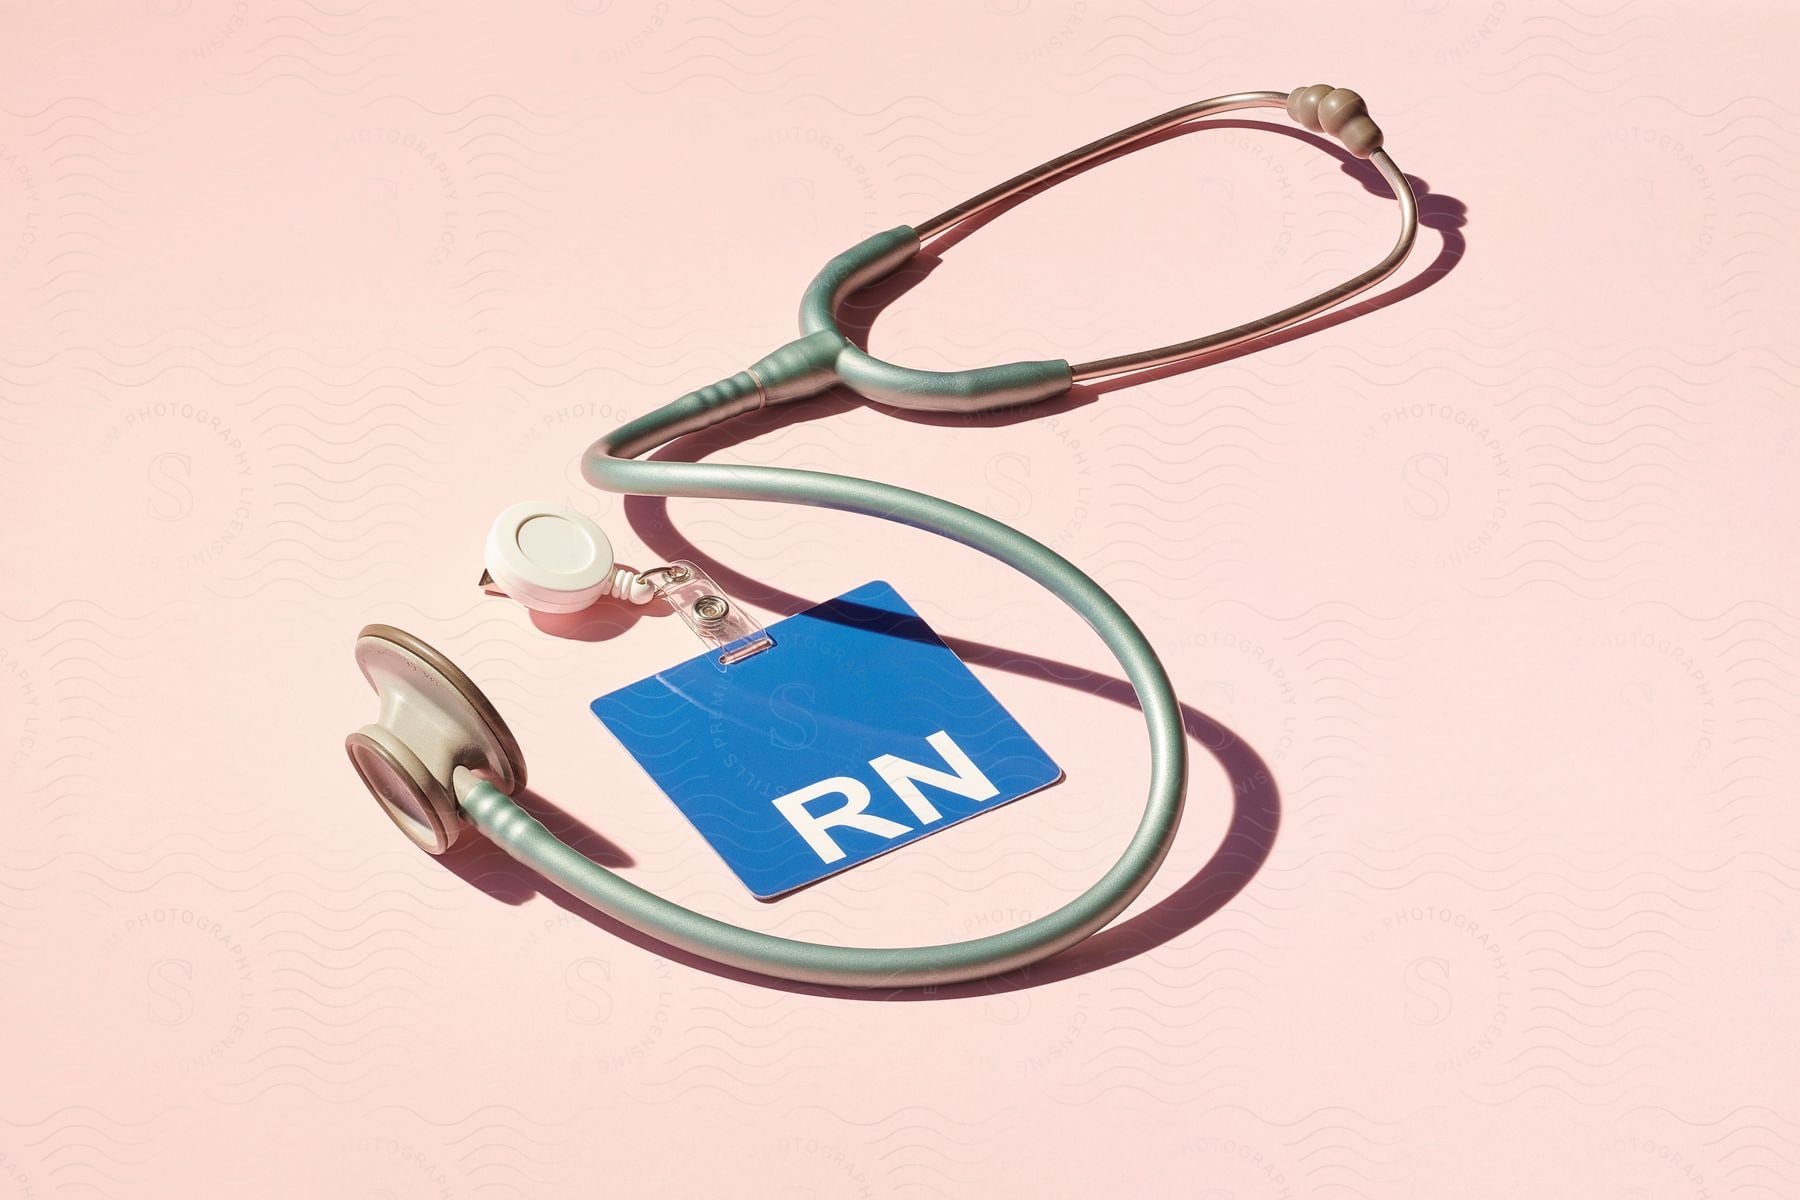 A name tag and stethoscope for a nurse on a pink background